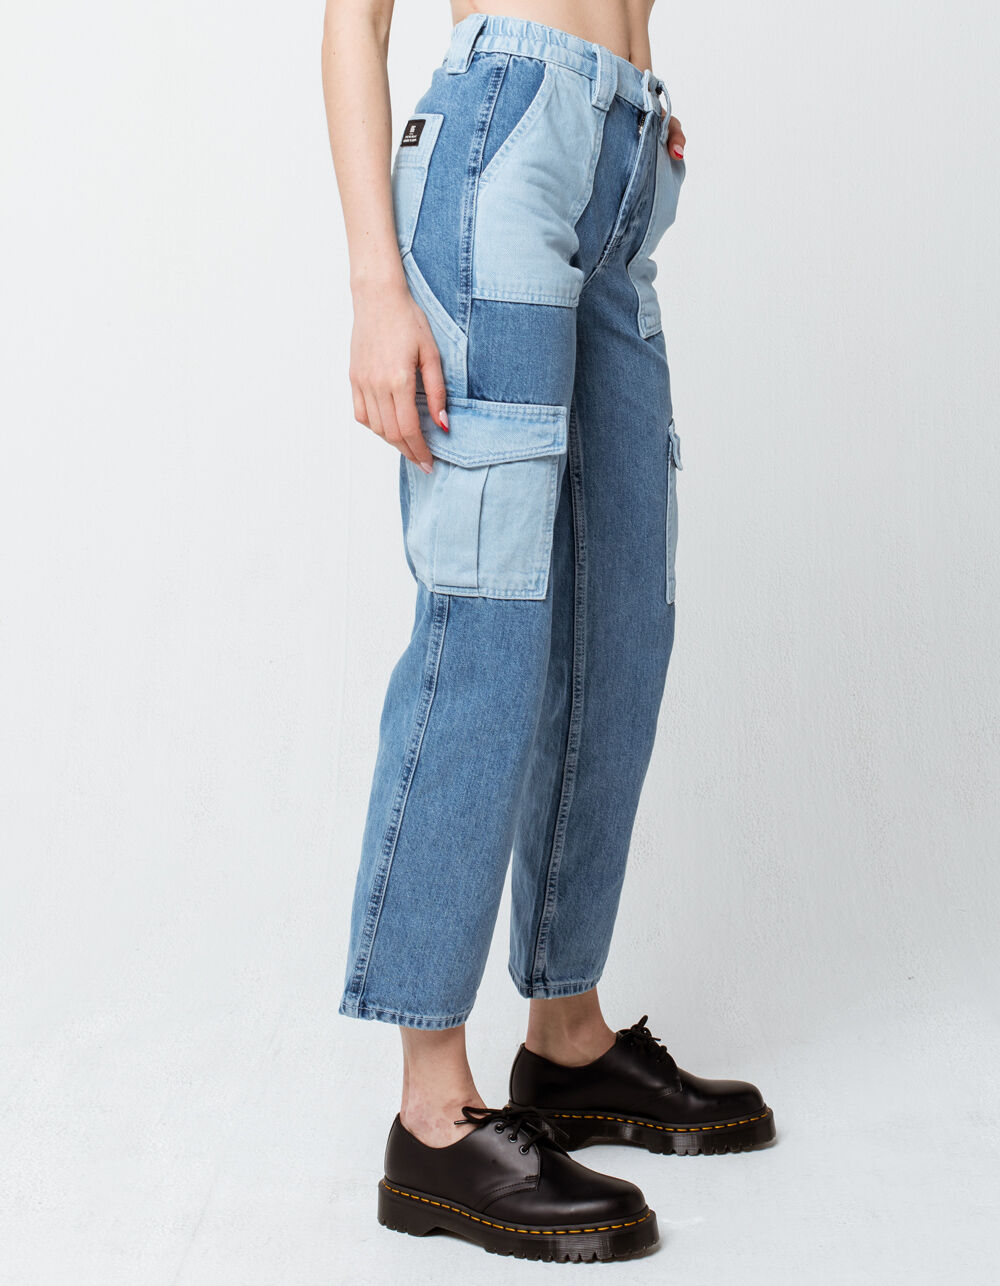 BDG Urban Outfitters Patchwork Skate Womens Jeans - BLUE | Tillys